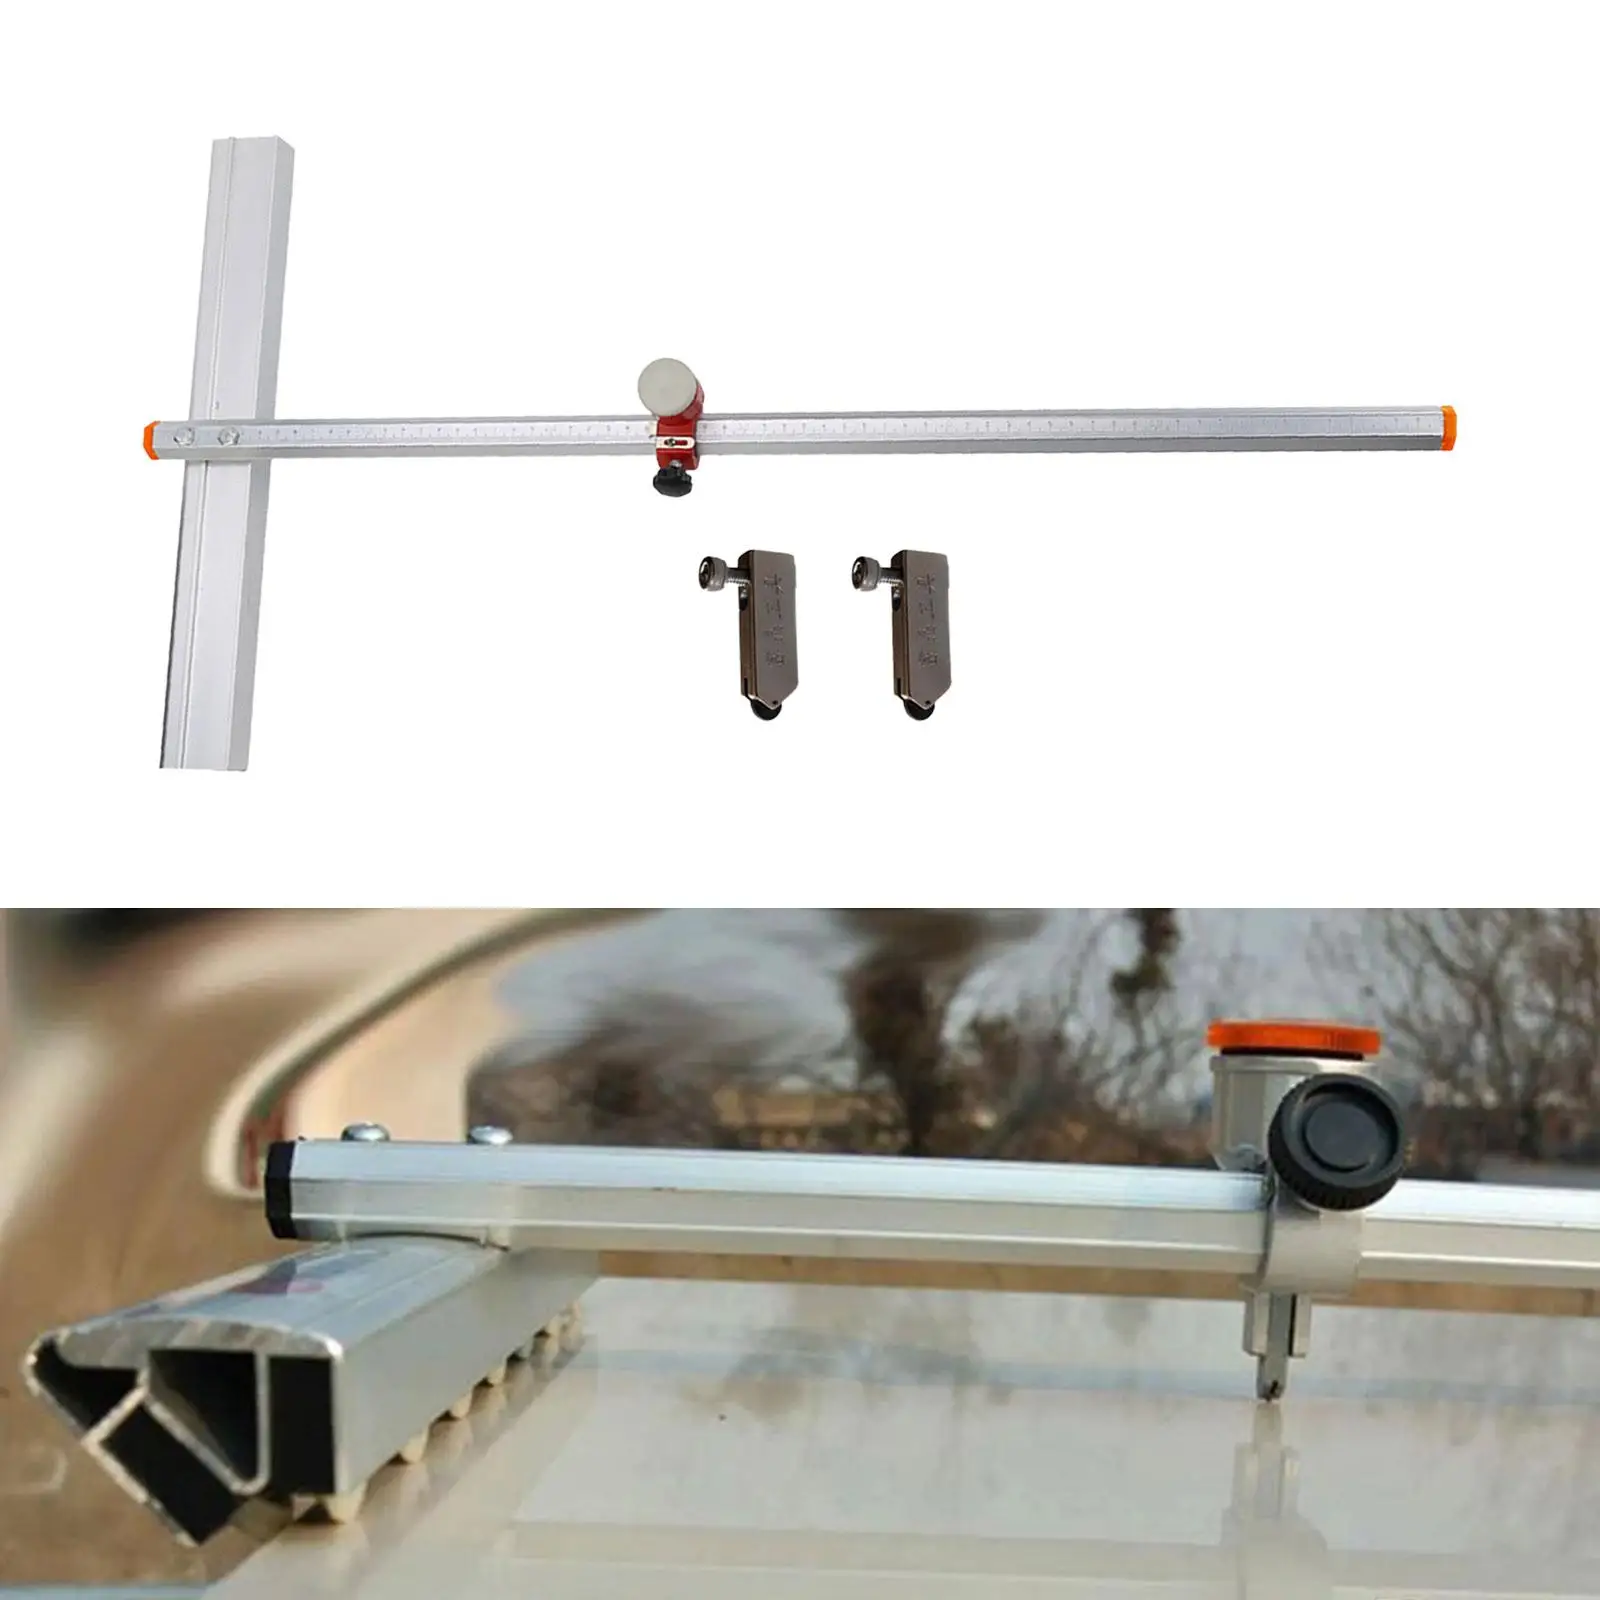 Glass Cutter 63cm Multifunctional with Automatic Oil feed Tile Cutter T Shaped Ceramic Cutting Tool for Mirrors Ceramic Tile